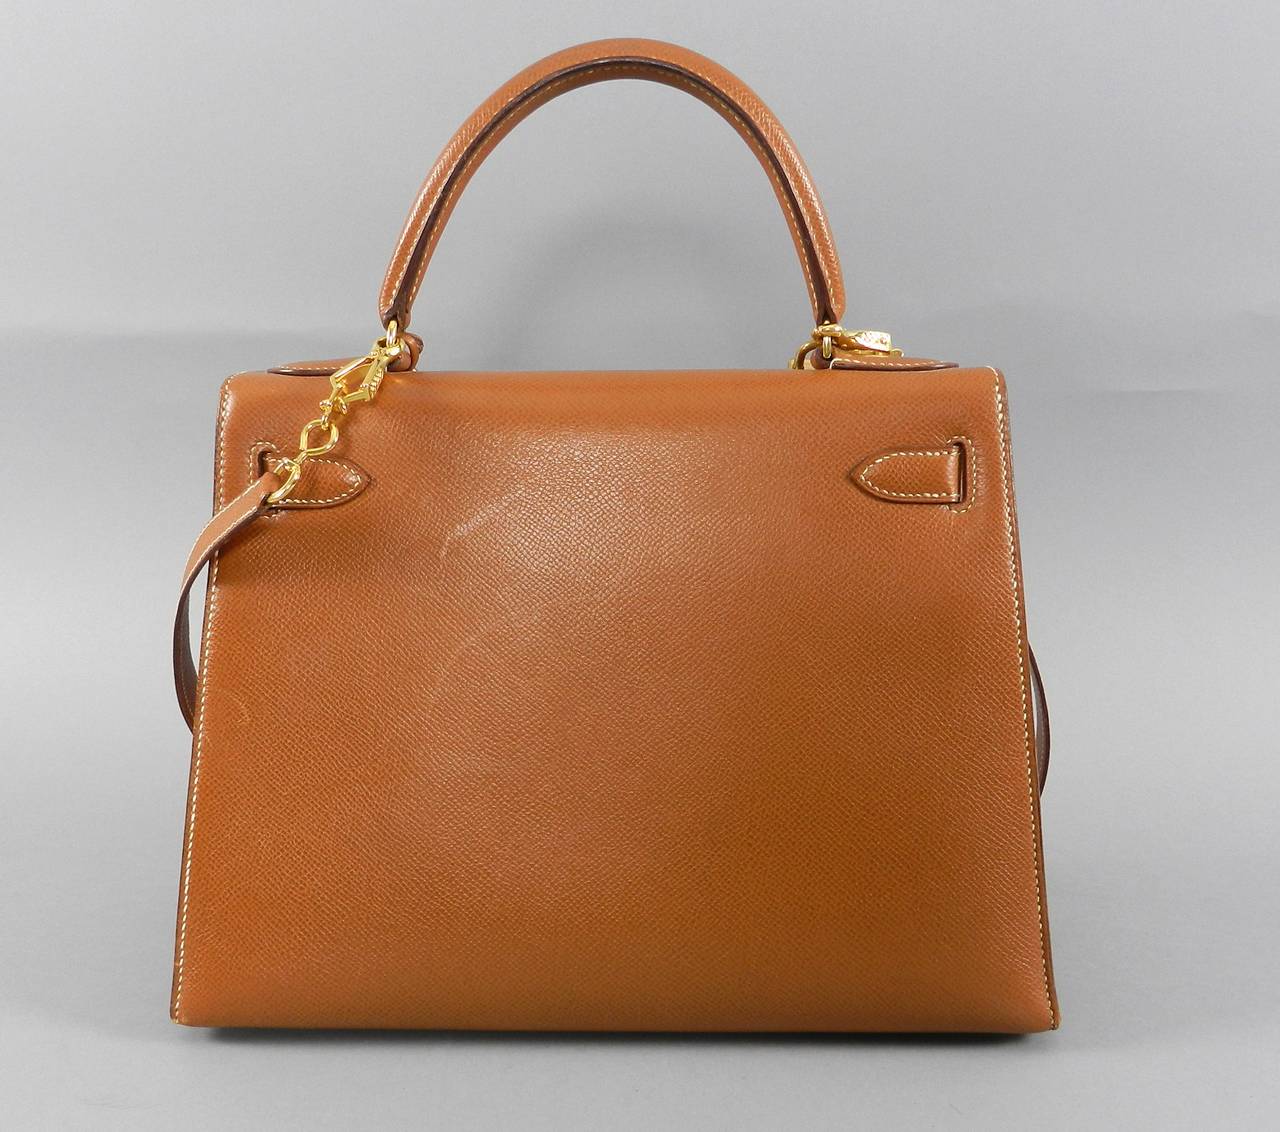 Hermes vintage 1991 tan Kelly 28 cm bag.  Sellier, goldtone hardware, courcheval leather. Comes with shoulder strap, original lock, keys, clochette, duster. This vintage bag has some scuffing across front right side, and bottom centre front. Some